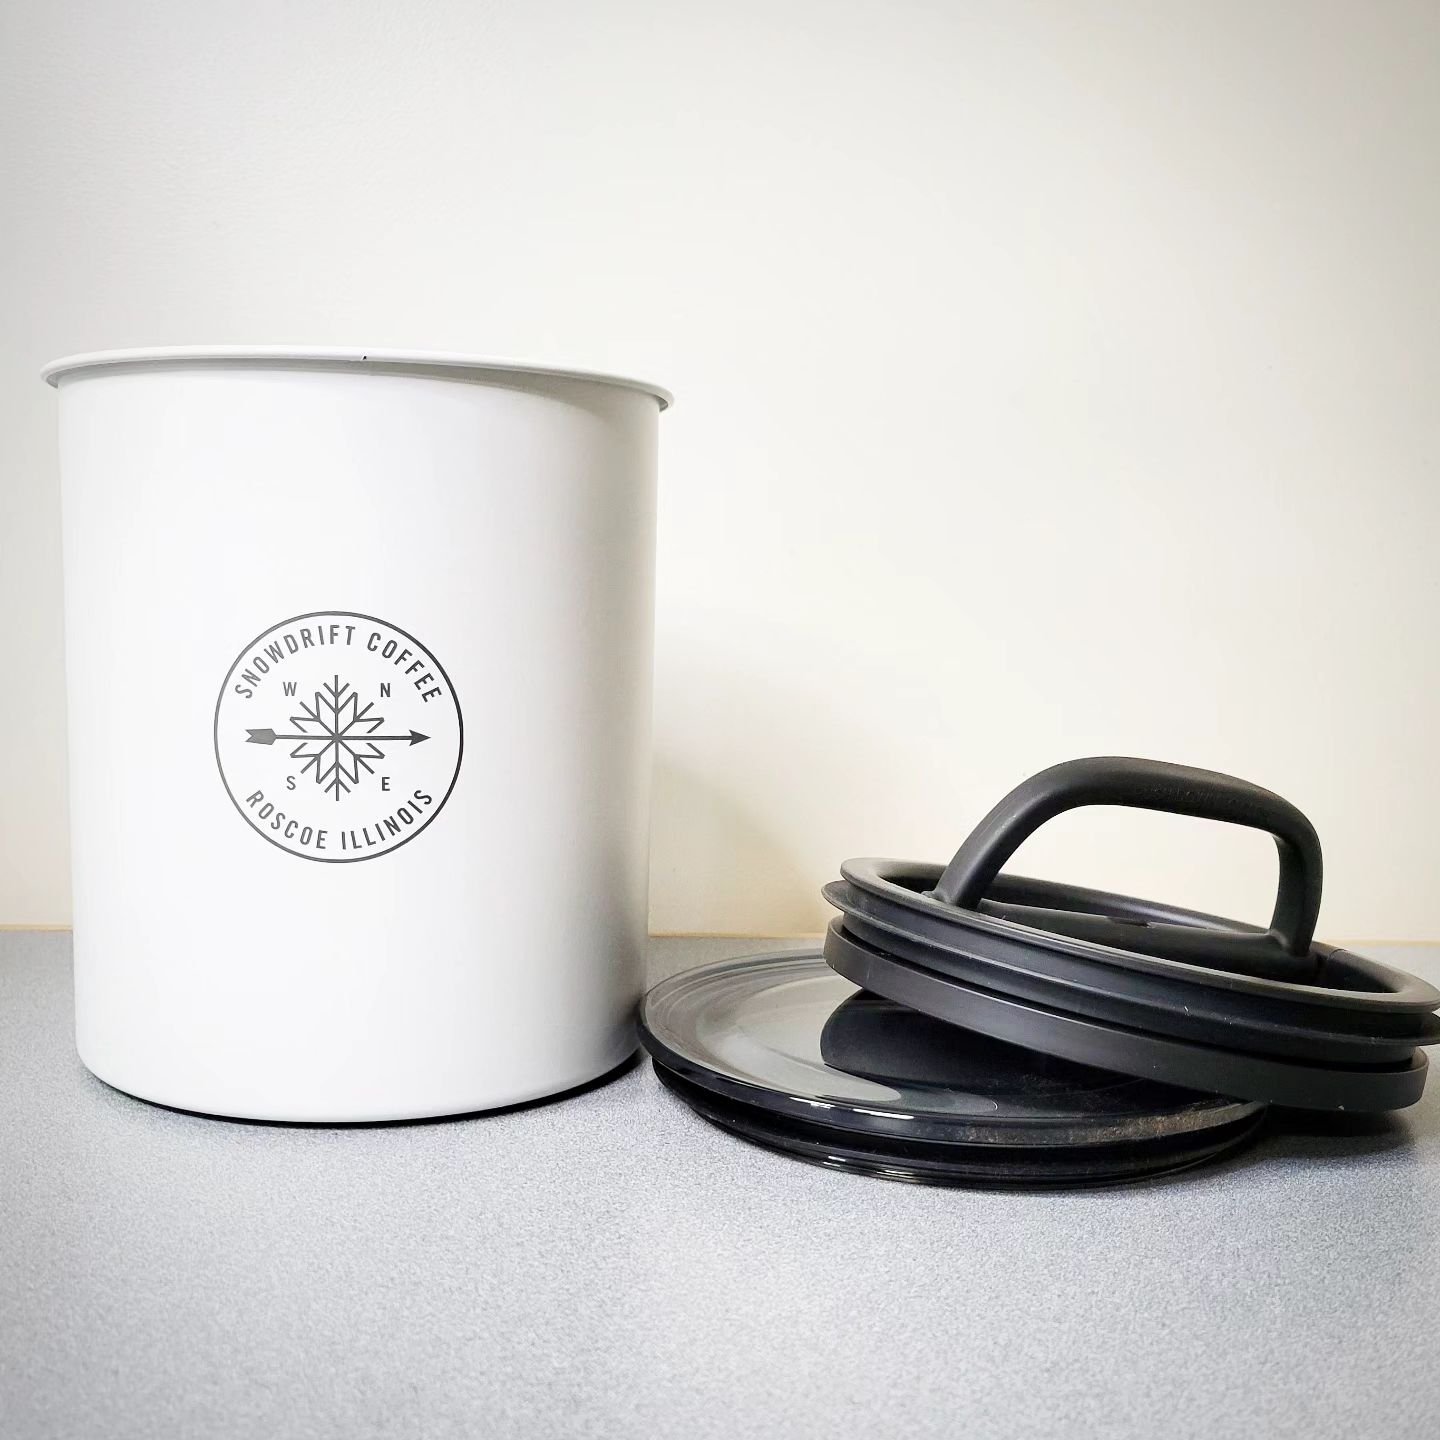 New Merchandise Now Available!

These 1 Kilo Airscape canisters are a great way to keep your coffee fresh when buying in bulk. Perfect for those who buy 2lbs at a time!

We've added a Buy Merch tab on our website and will also have branded travel mug